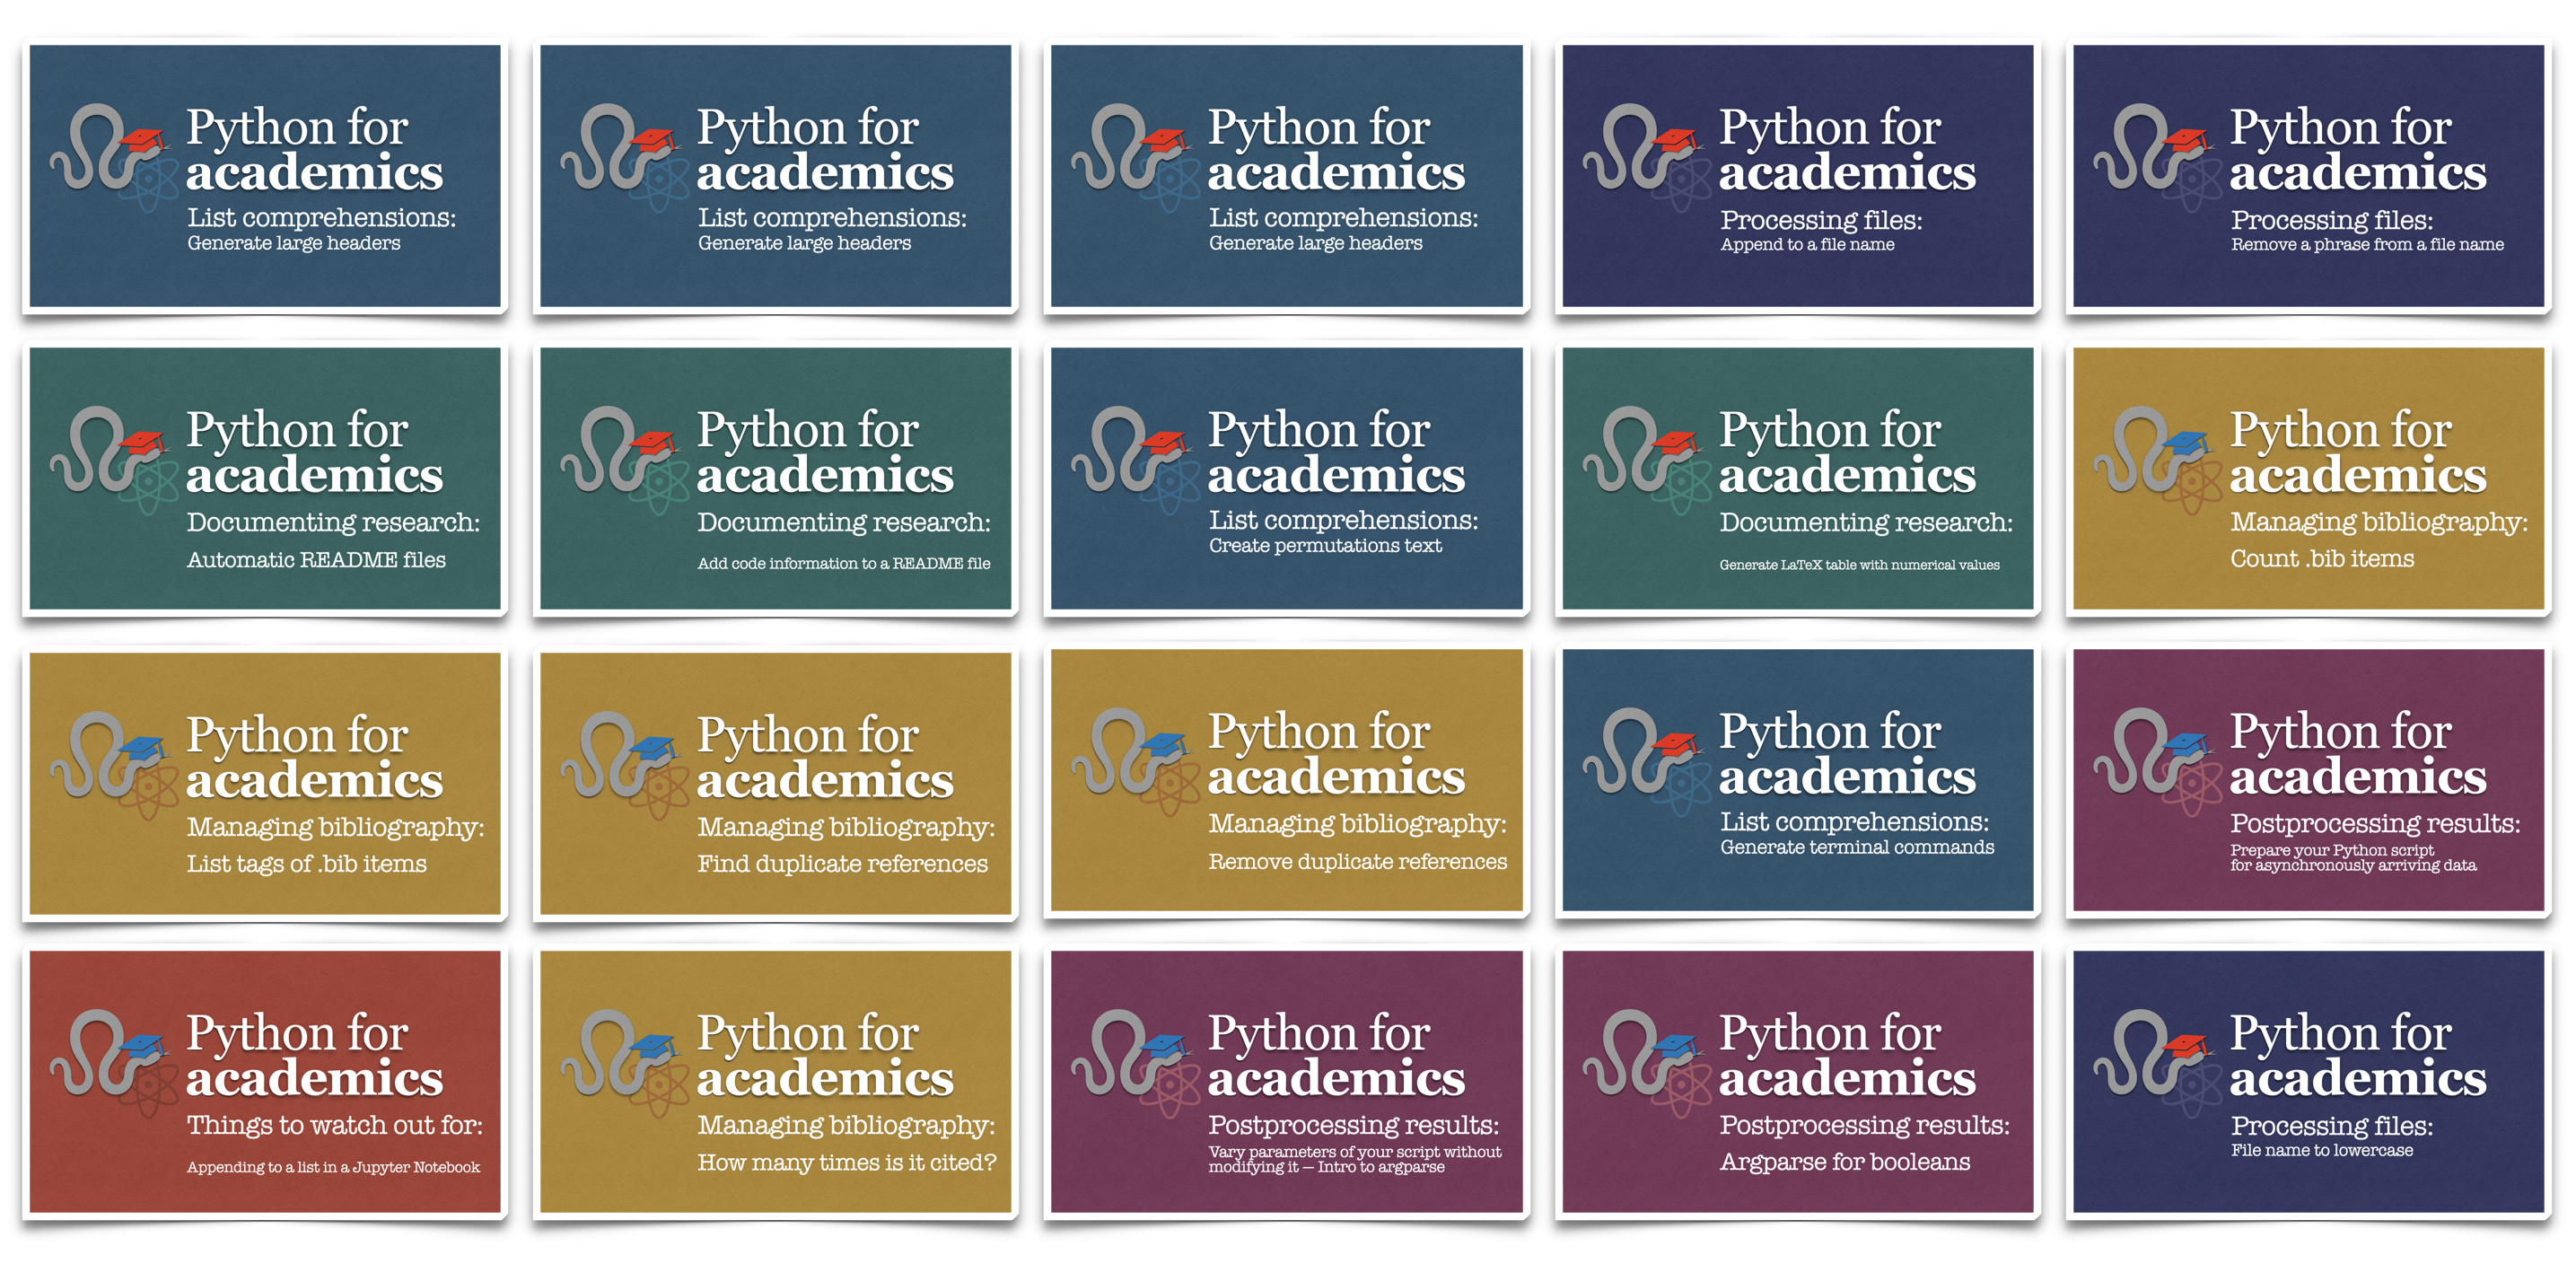 python-for-academics-videos-1-20.png